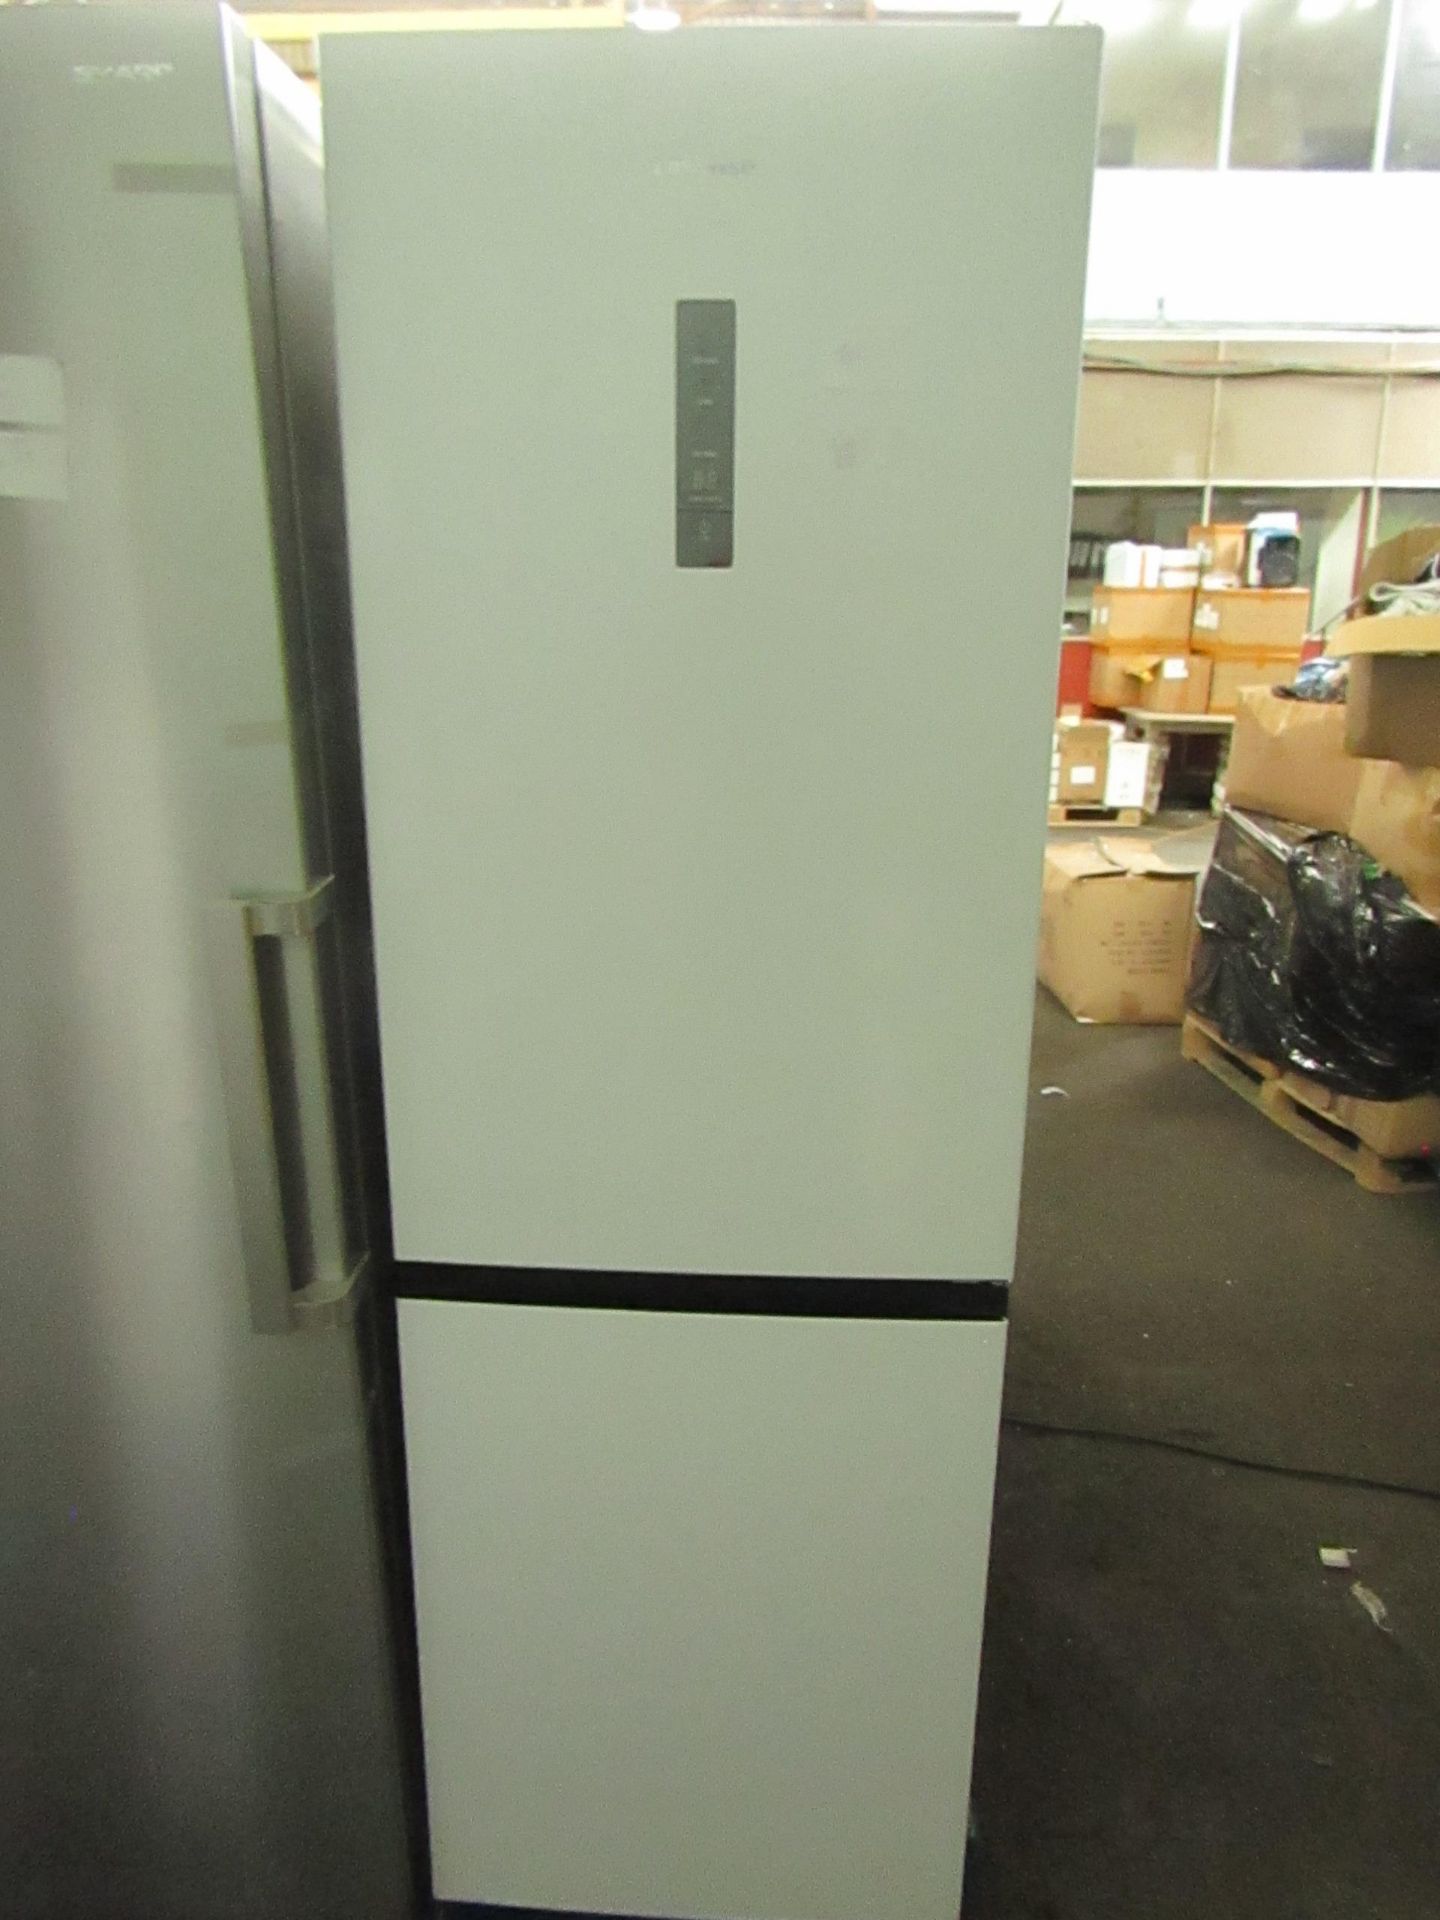 Hisense 60/40 Fridge freezer, Powers on and gets cold in both fridge and freezer, has a small